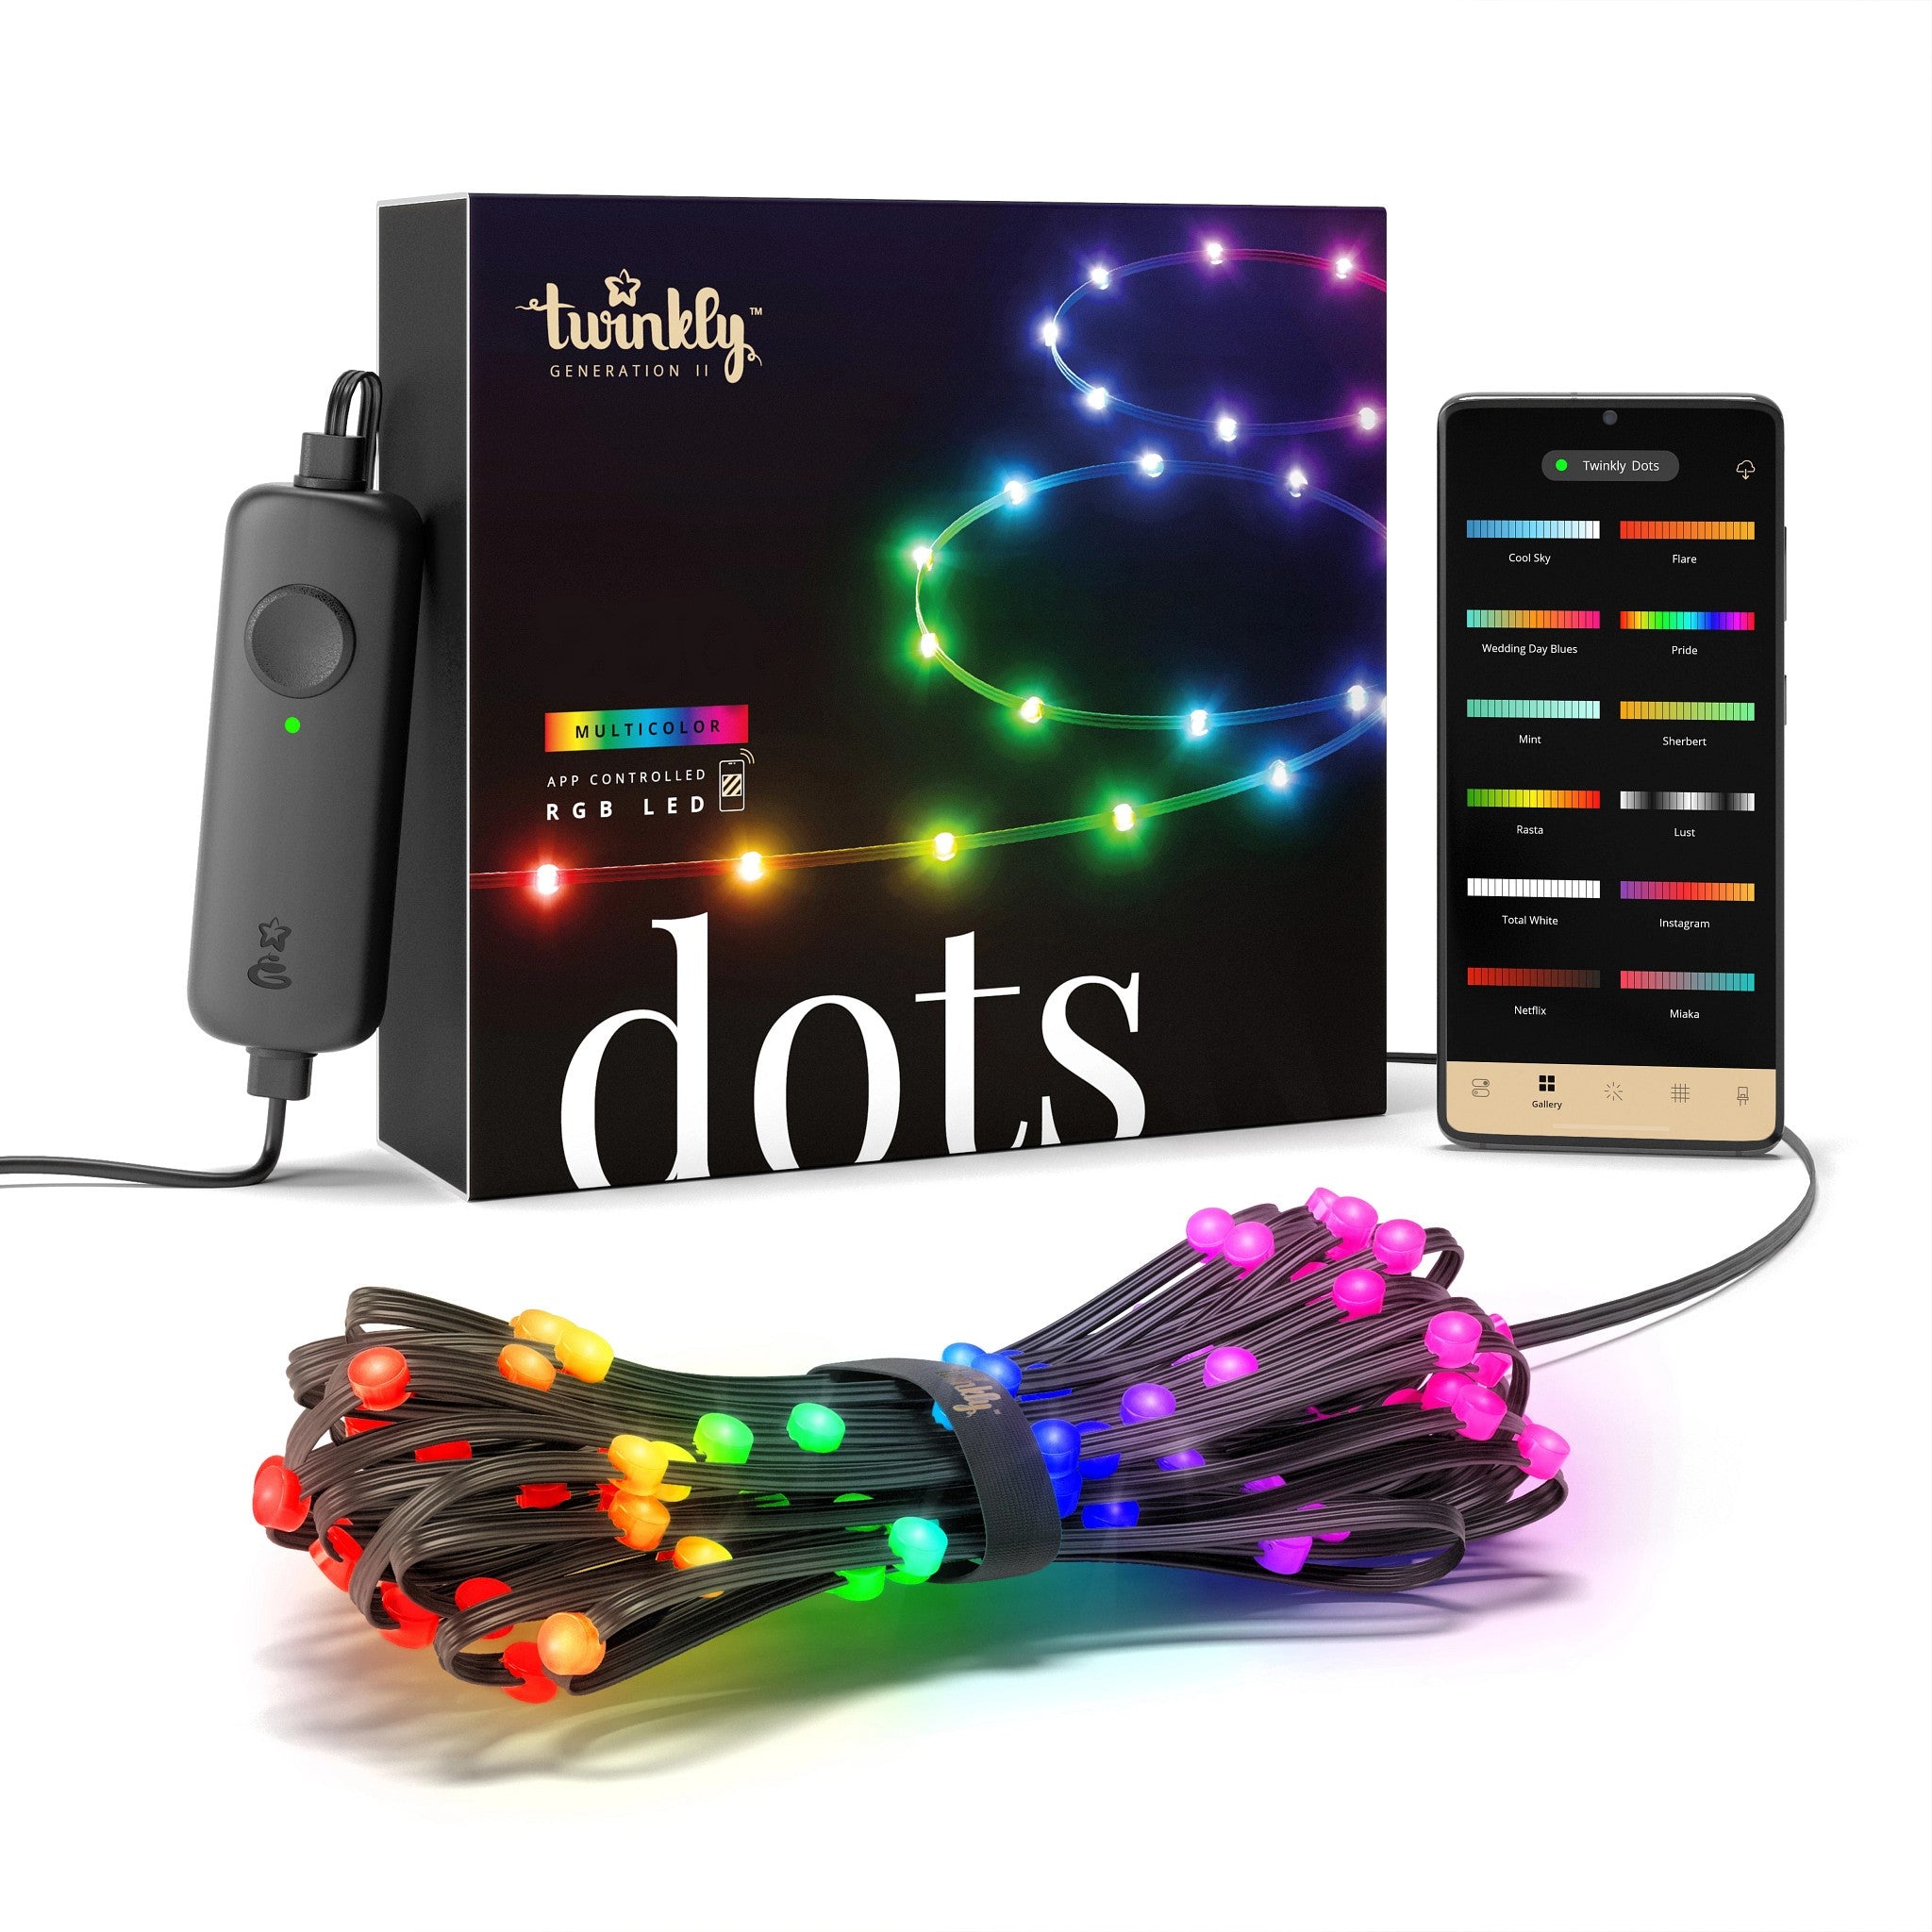 Twinkly Dots App Controlled Flexible Black Wire Light Strings Indoor and Outdoor Smart Home Lighting Decoration, Multicolor LED